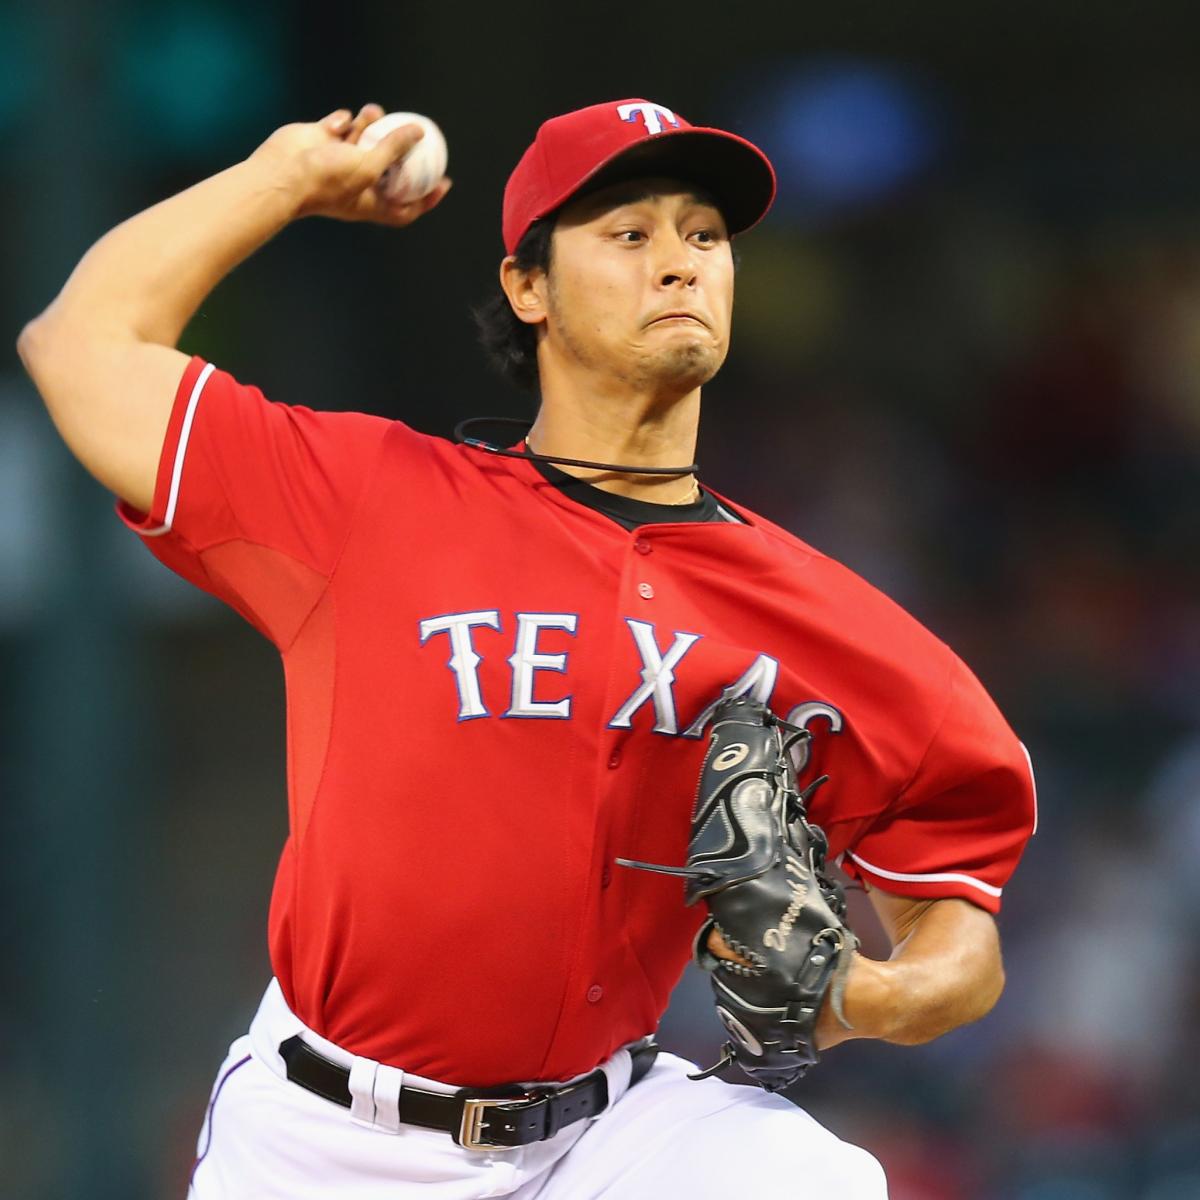 What Pros Wear: What Pros Wear: Yu Darvish (Glove, Cleats